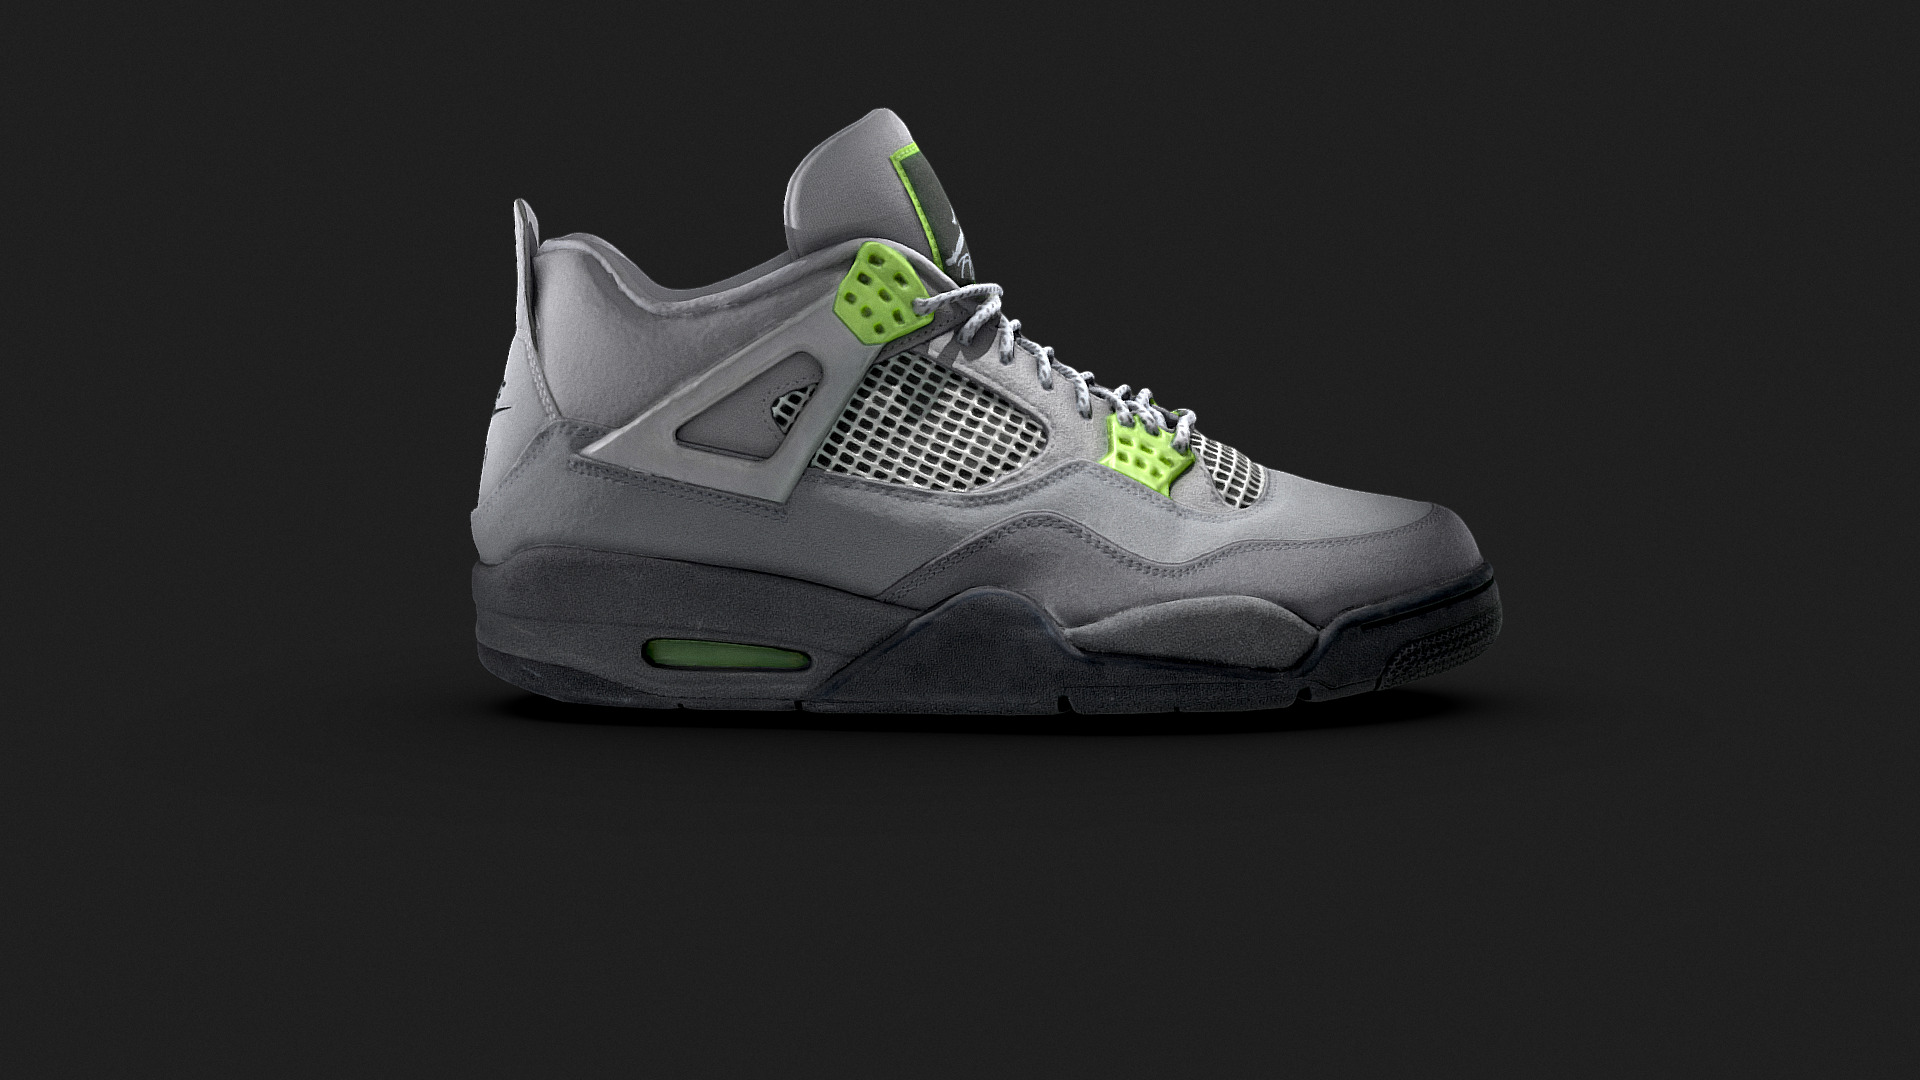 3D model Nike Air Jordan Retro IV 95 Neon - This is a 3D model of the Nike Air Jordan Retro IV 95 Neon. The 3D model is about a white and green shoe.